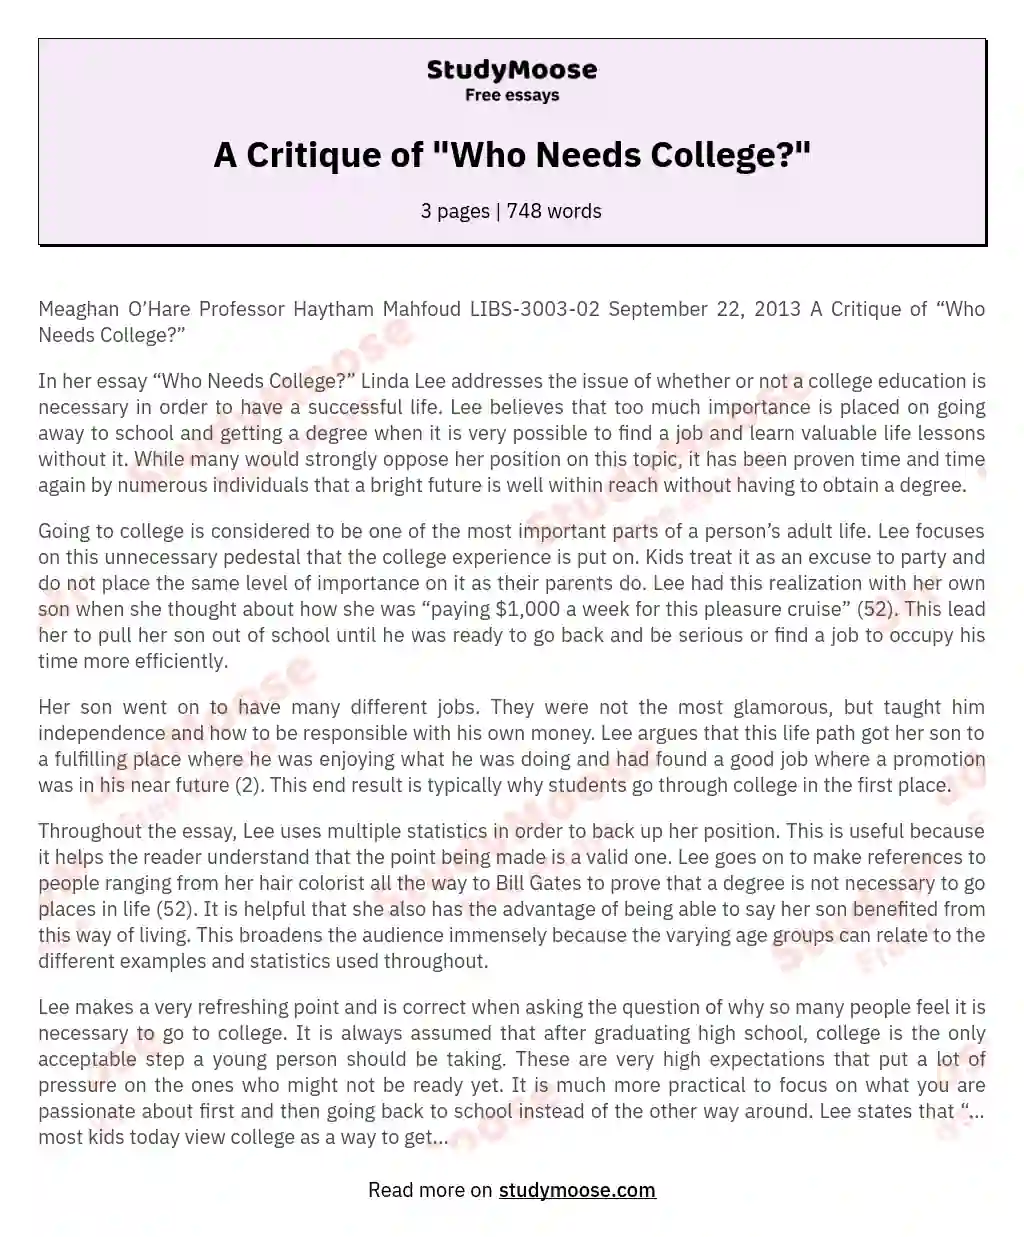 A Critique of "Who Needs College?" essay